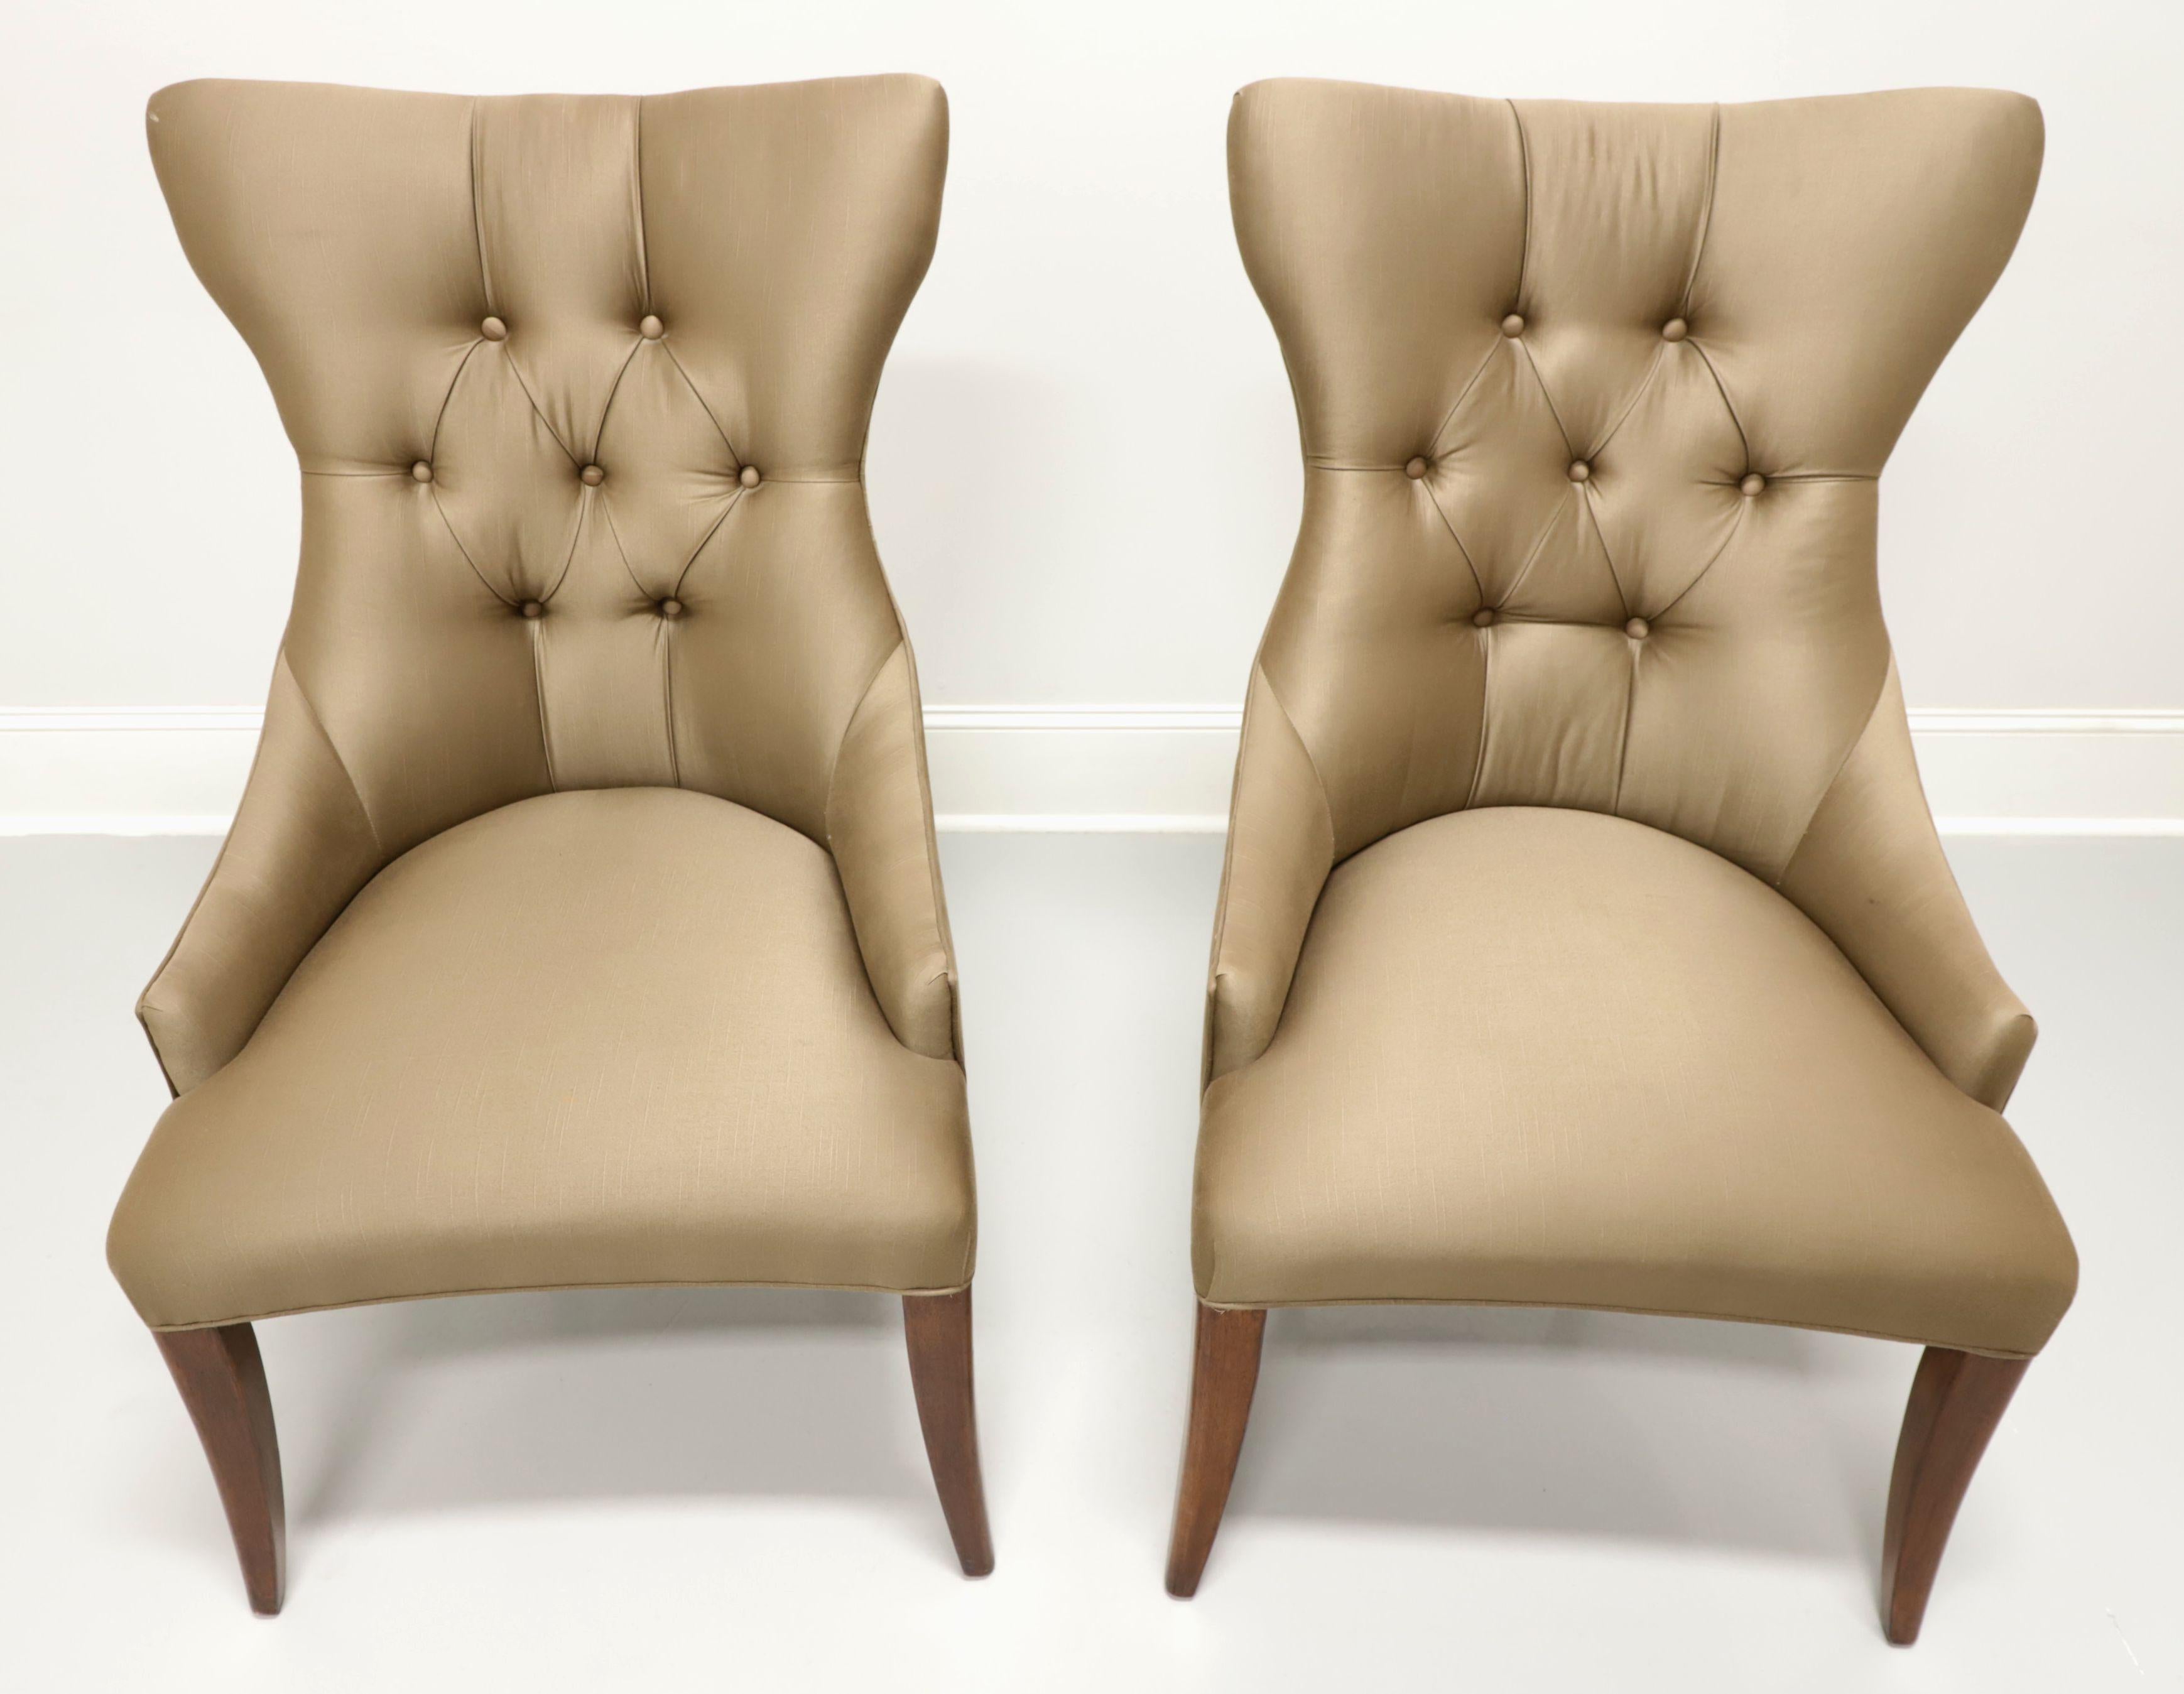 A pair of Contemporary style dining side chairs by Bernhardt Furniture, from their Opus XIX Collection. Solid wood frame with a walnut finish and fabric upholstered. Features a high back with slight wings, button tufted, low arms, high sheen satin